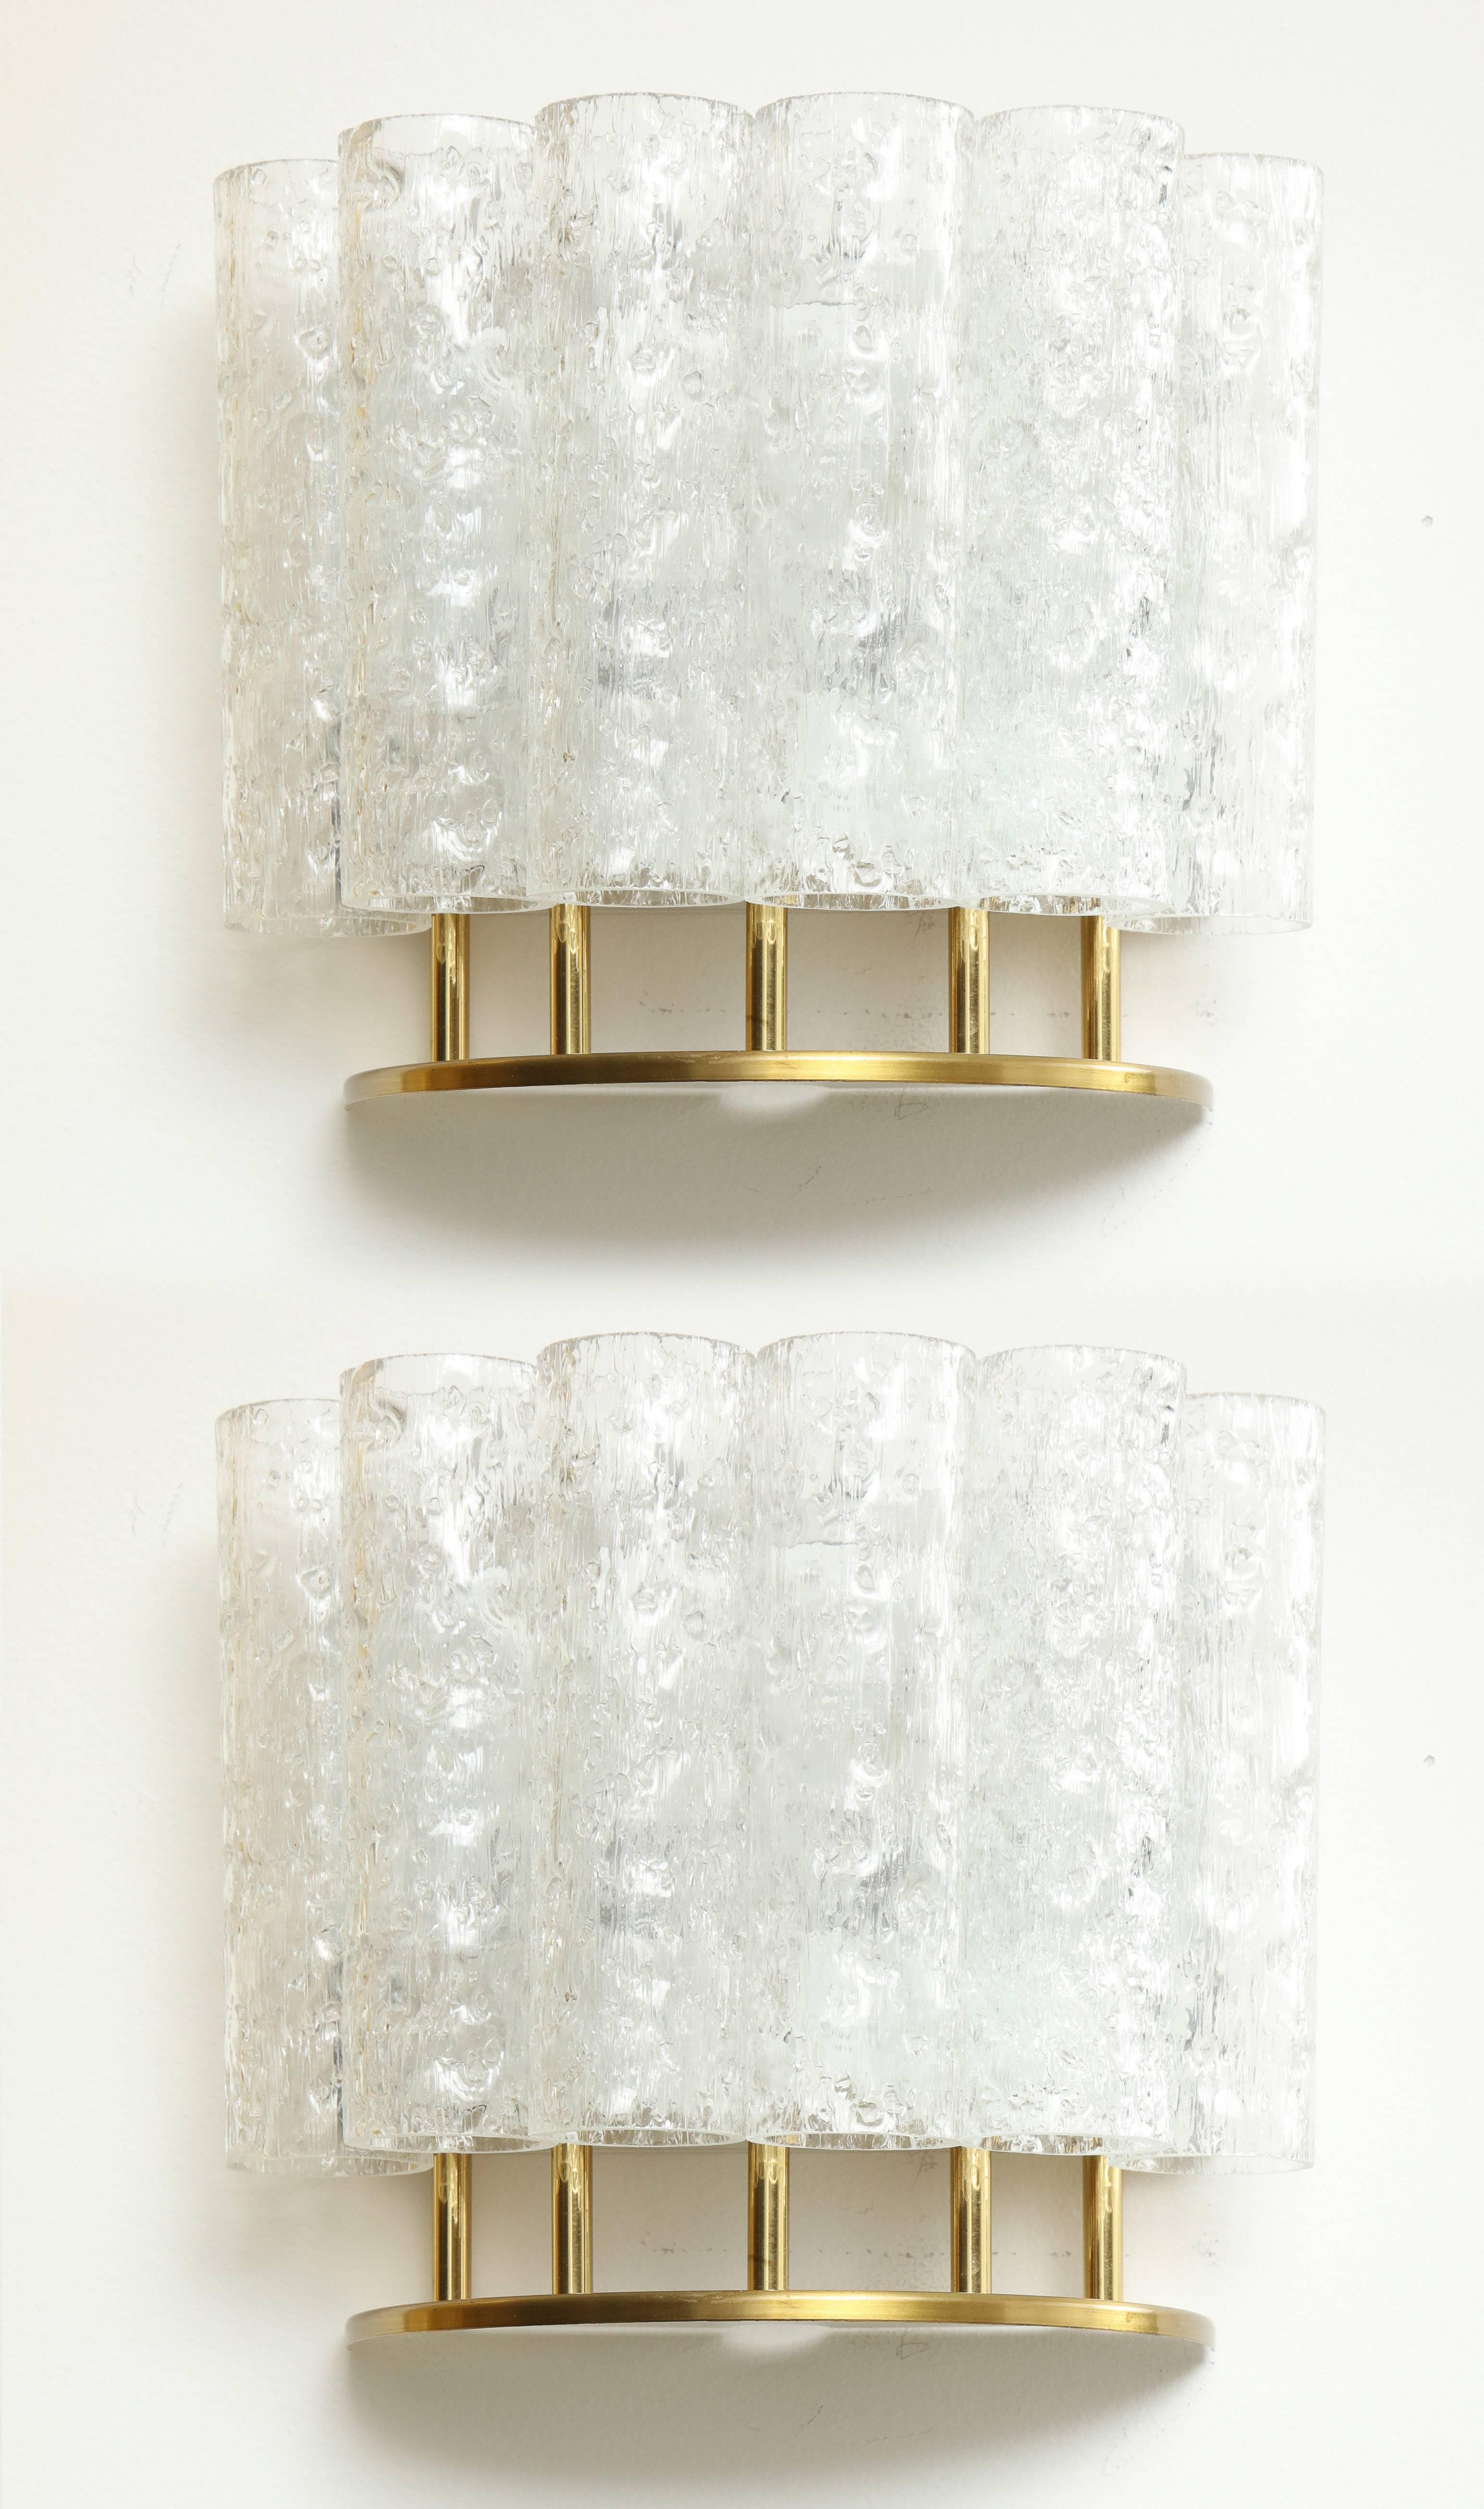 Pair of 1960s sconces by Doria lighting company.
Six frosted glass tubes form a demilune to conceal two lights which illuminate these simple and elegant sconces.
The sconces have been newly rewired.